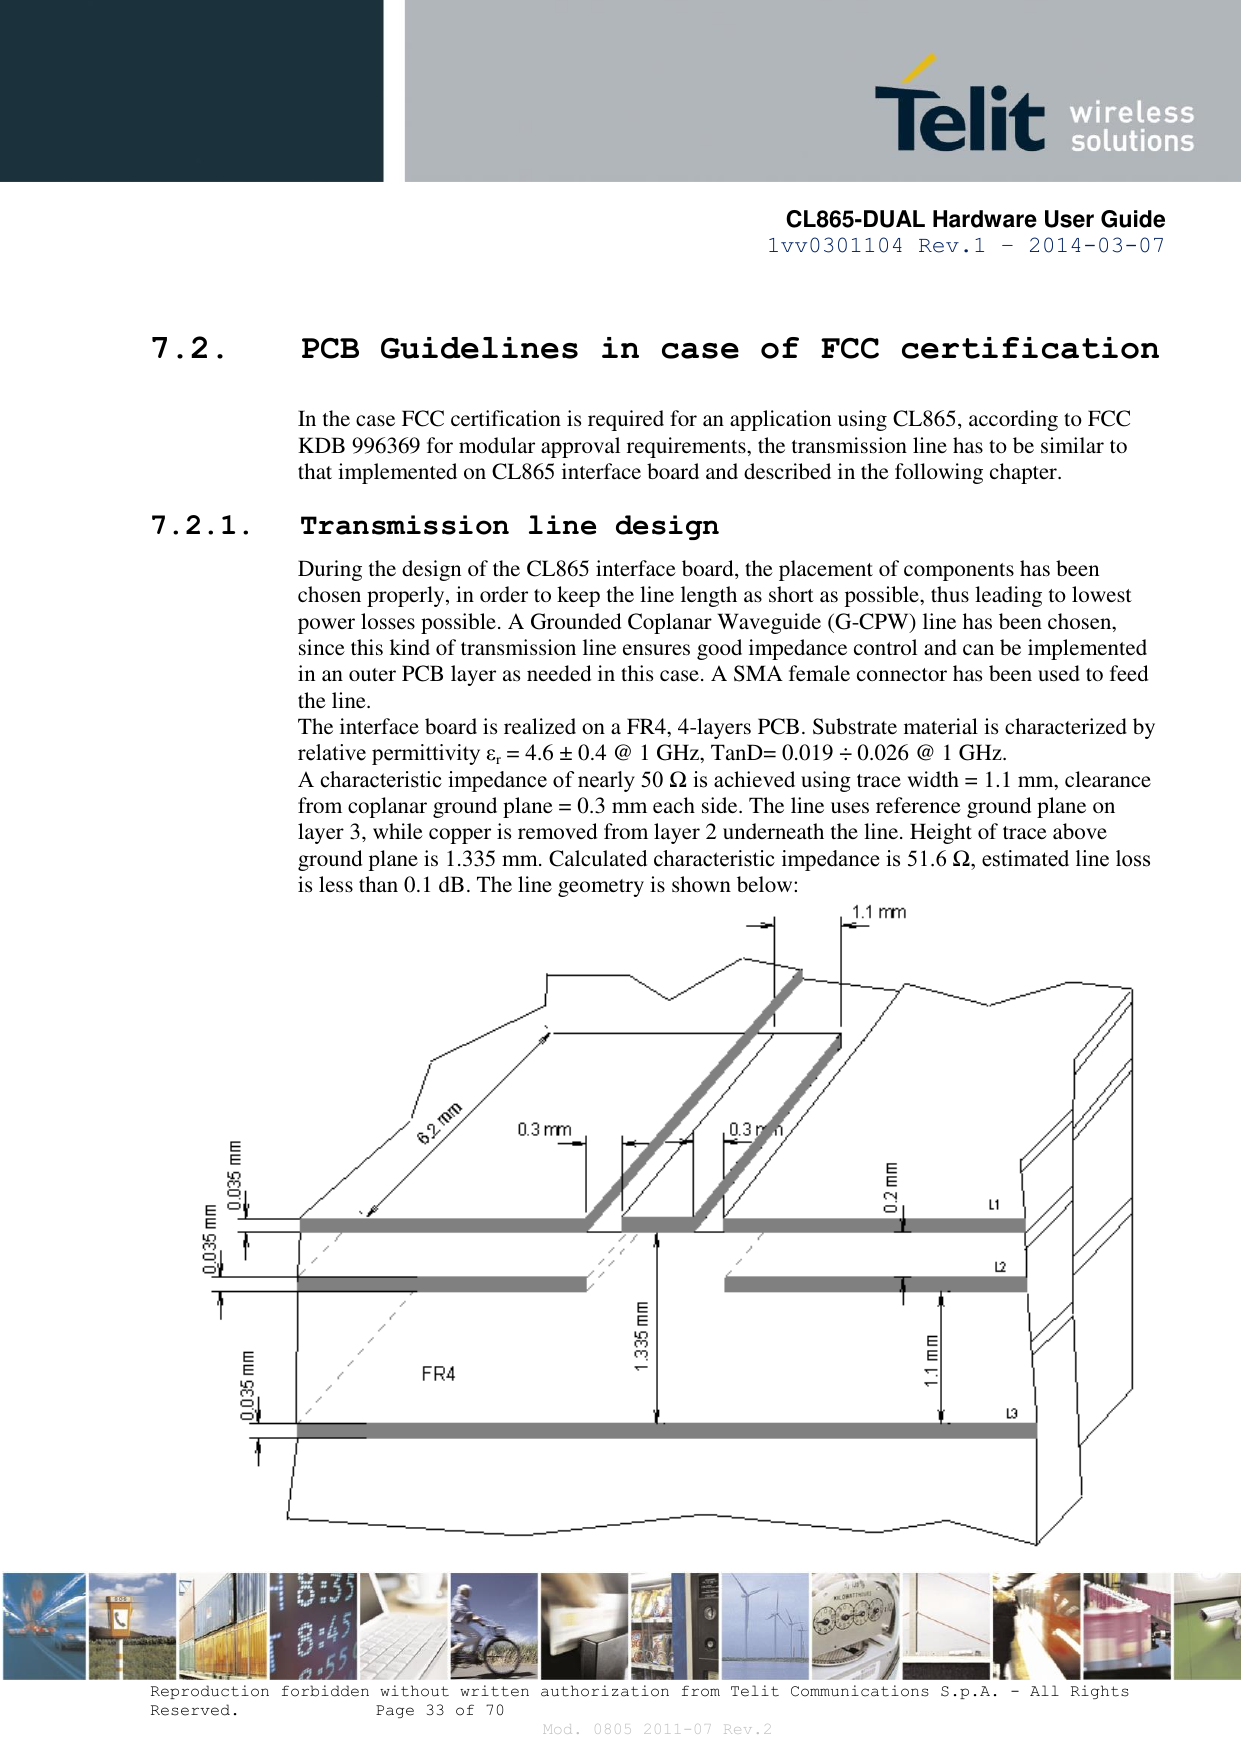       CL865-DUAL Hardware User Guide 1vv0301104 Rev.1 – 2014-03-07  Reproduction forbidden without written authorization from Telit Communications S.p.A. - All Rights Reserved.    Page 33 of 70 Mod. 0805 2011-07 Rev.2 7.2. PCB Guidelines in case of FCC certification In the case FCC certification is required for an application using CL865, according to FCC KDB 996369 for modular approval requirements, the transmission line has to be similar to that implemented on CL865 interface board and described in the following chapter. 7.2.1. Transmission line design During the design of the CL865 interface board, the placement of components has been chosen properly, in order to keep the line length as short as possible, thus leading to lowest power losses possible. A Grounded Coplanar Waveguide (G-CPW) line has been chosen, since this kind of transmission line ensures good impedance control and can be implemented in an outer PCB layer as needed in this case. A SMA female connector has been used to feed the line. The interface board is realized on a FR4, 4-layers PCB. Substrate material is characterized by relative permittivity εr = 4.6 ± 0.4 @ 1 GHz, TanD= 0.019 ÷ 0.026 @ 1 GHz. A characteristic impedance of nearly 50 Ω is achieved using trace width = 1.1 mm, clearance from coplanar ground plane = 0.3 mm each side. The line uses reference ground plane on layer 3, while copper is removed from layer 2 underneath the line. Height of trace above ground plane is 1.335 mm. Calculated characteristic impedance is 51.6 Ω, estimated line loss is less than 0.1 dB. The line geometry is shown below:  